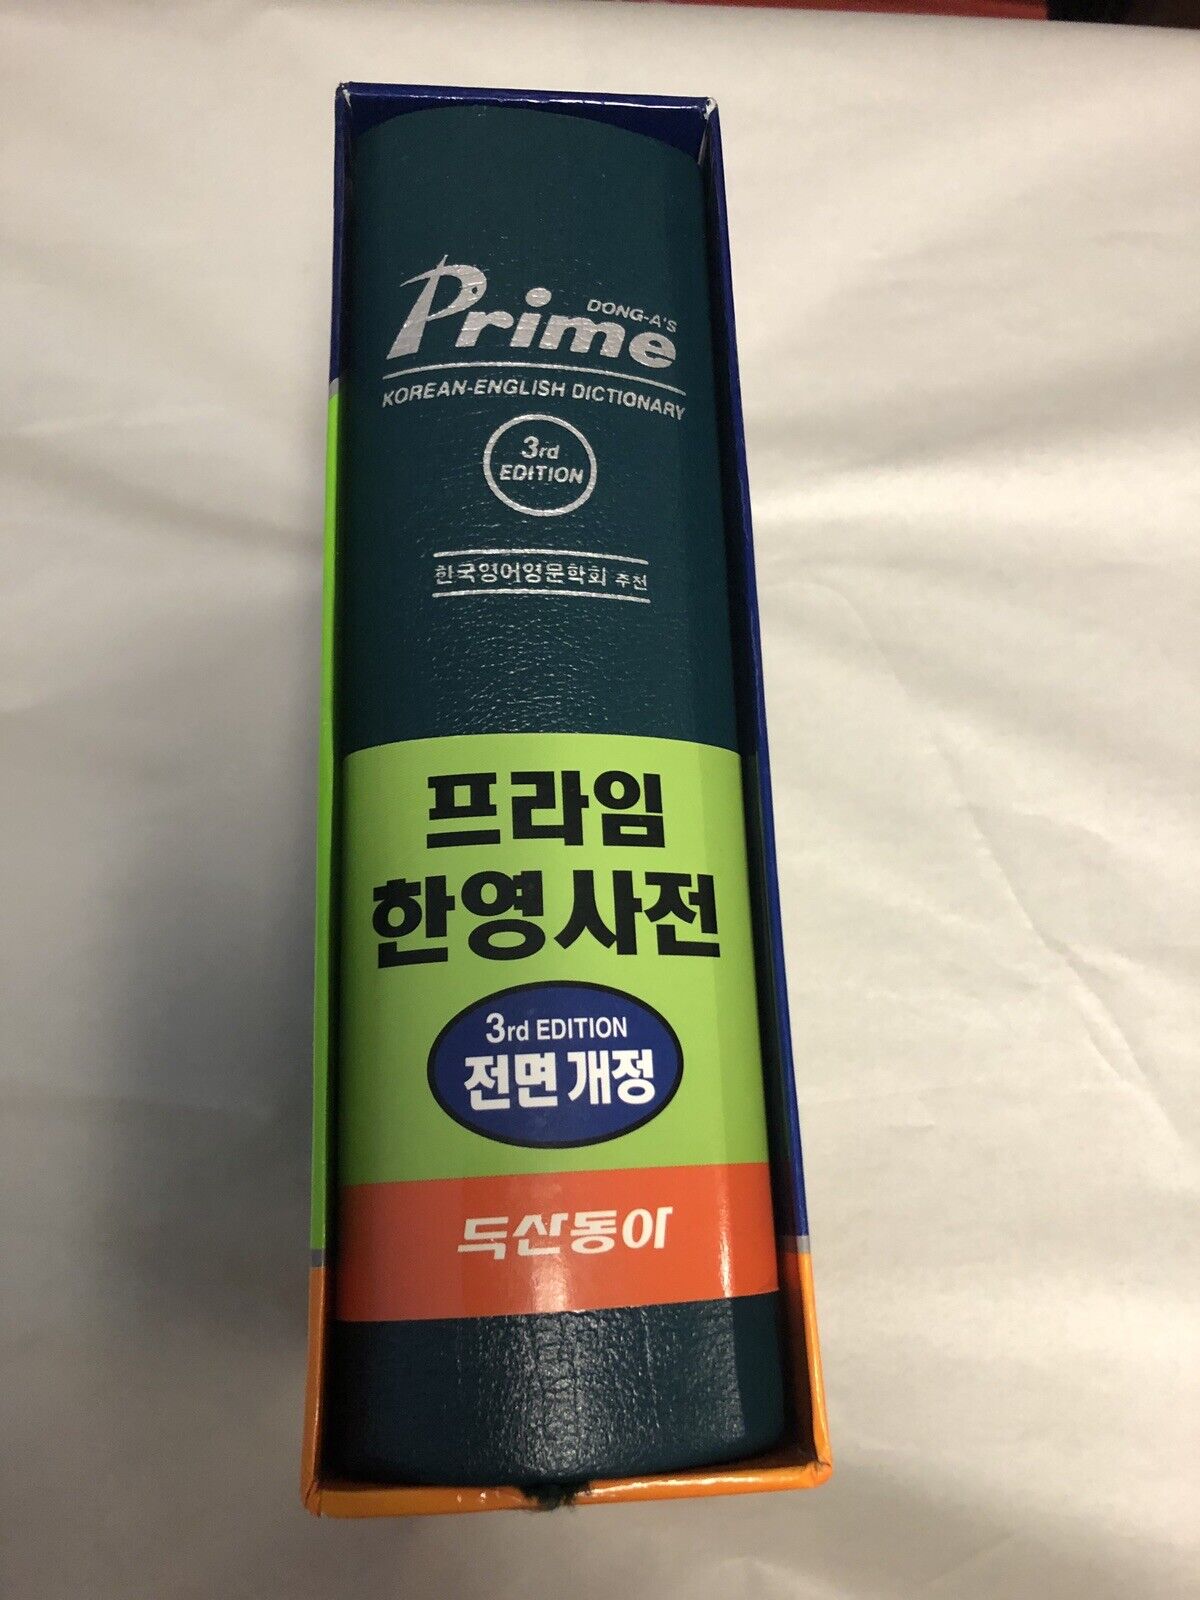 Dong-A\'s Prime Korean-English Dictionary 3rd edition with box